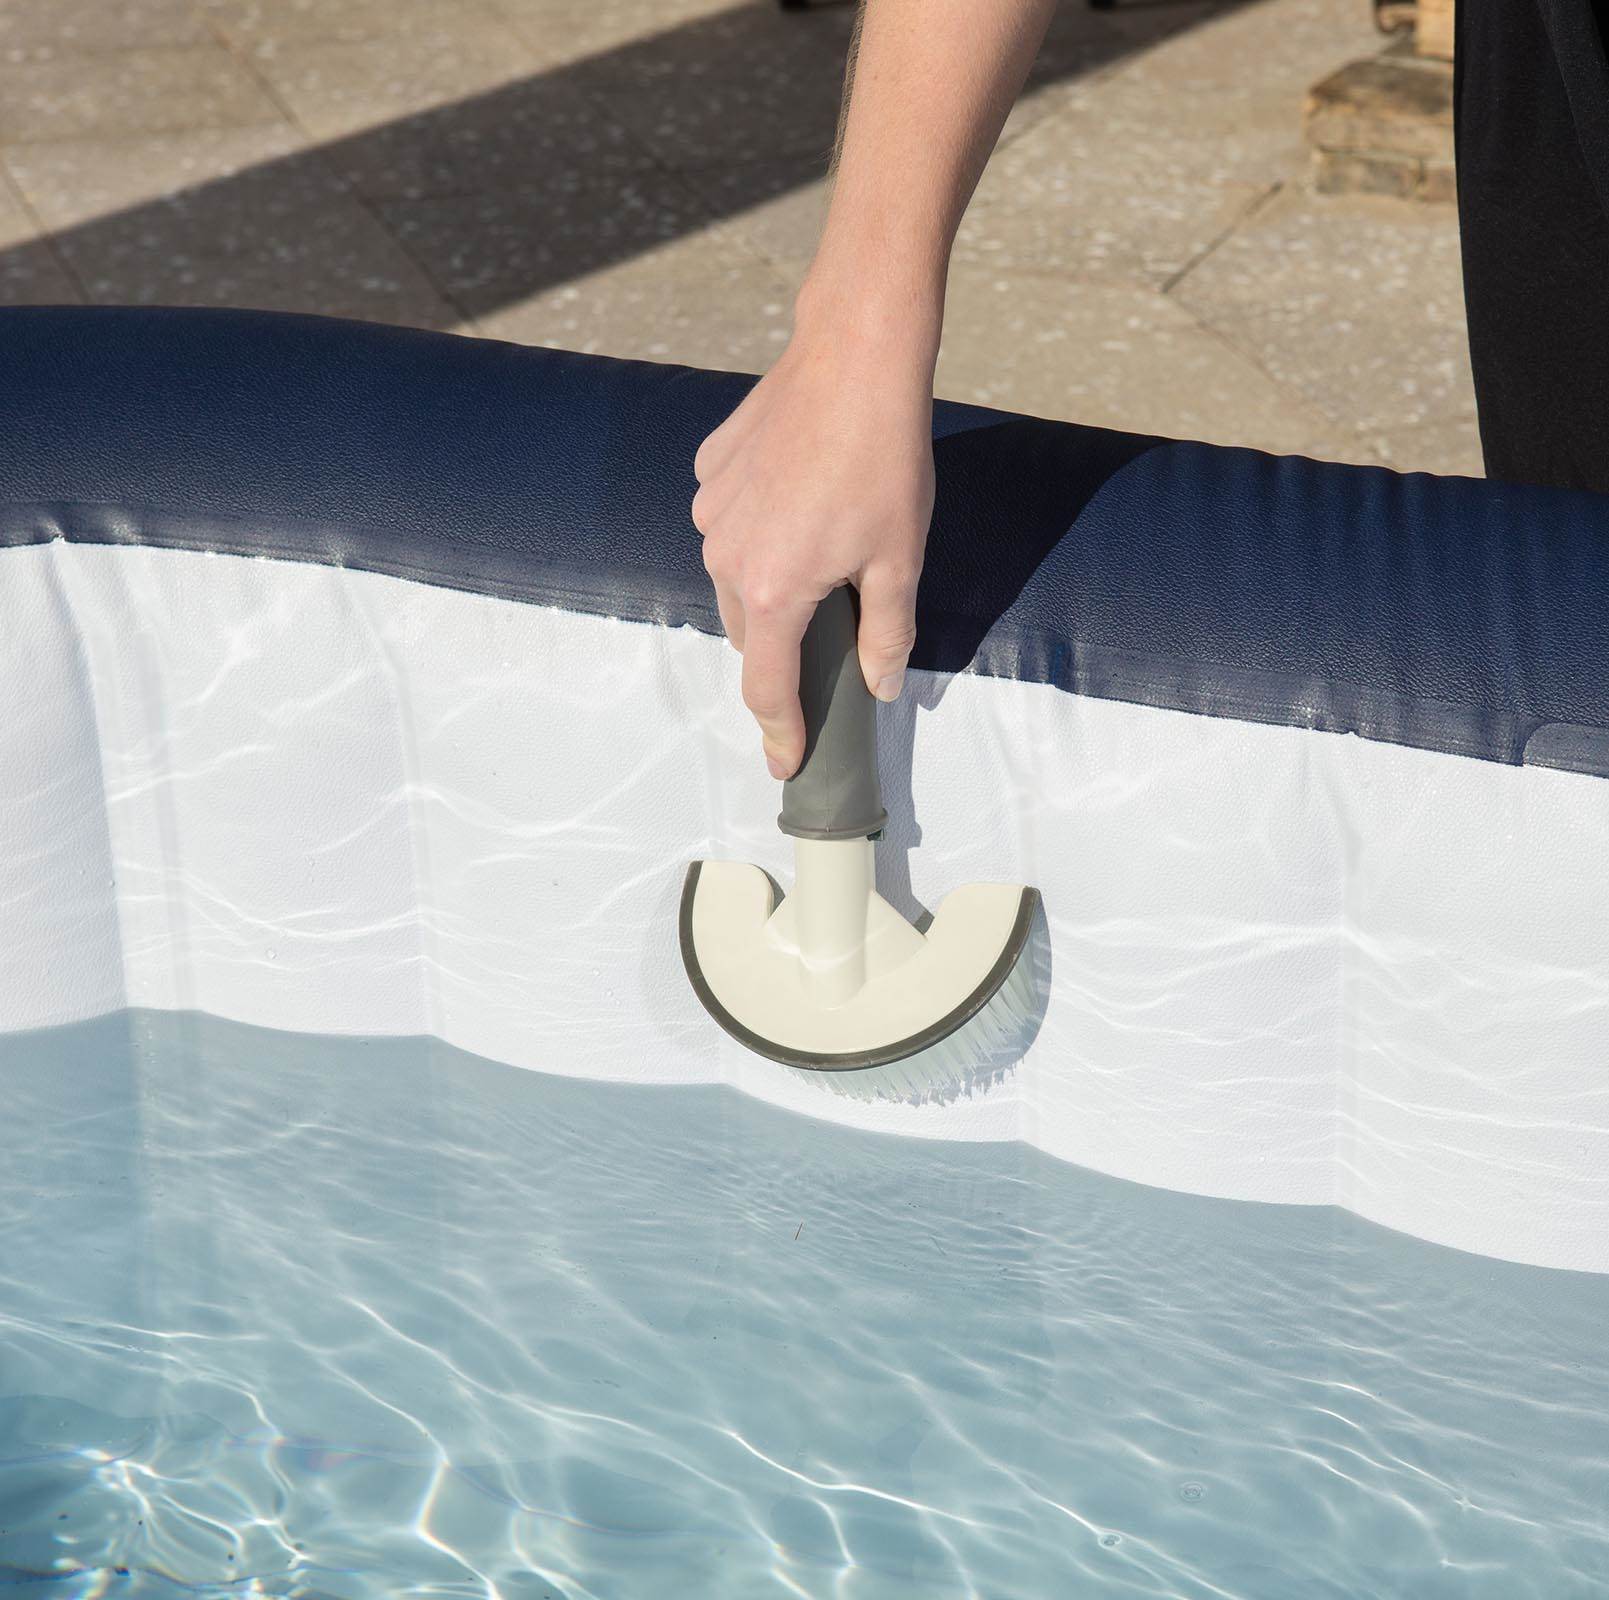 Bestway Maintenance Kit in the Pool Cleaning Accessories at Lowes.com